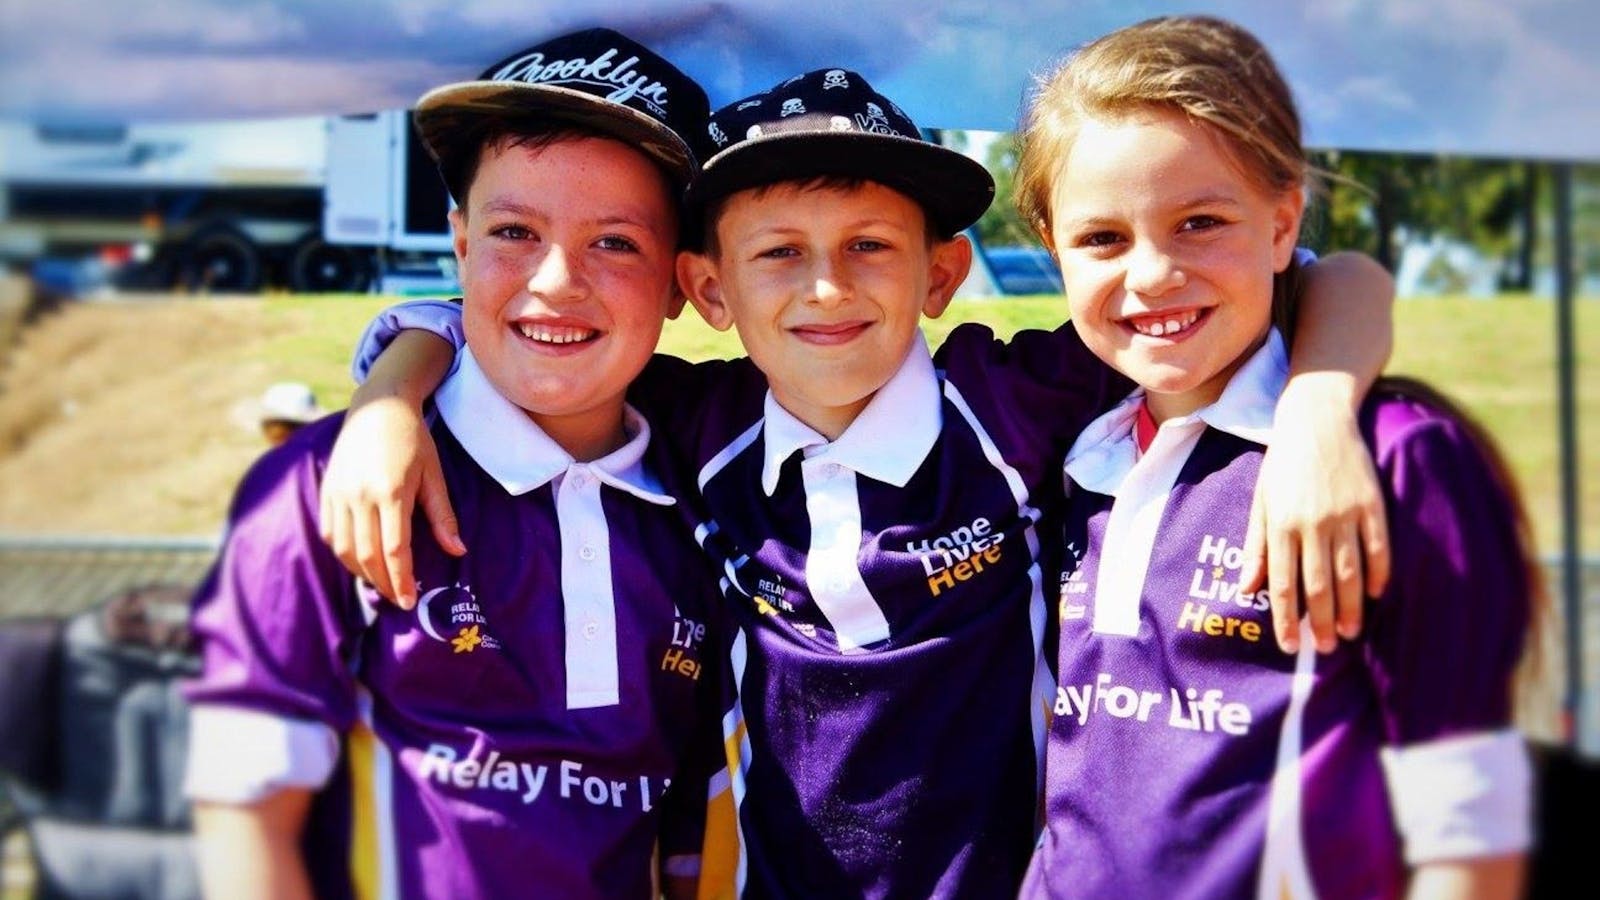 Image for Relay For Life - Blacktown